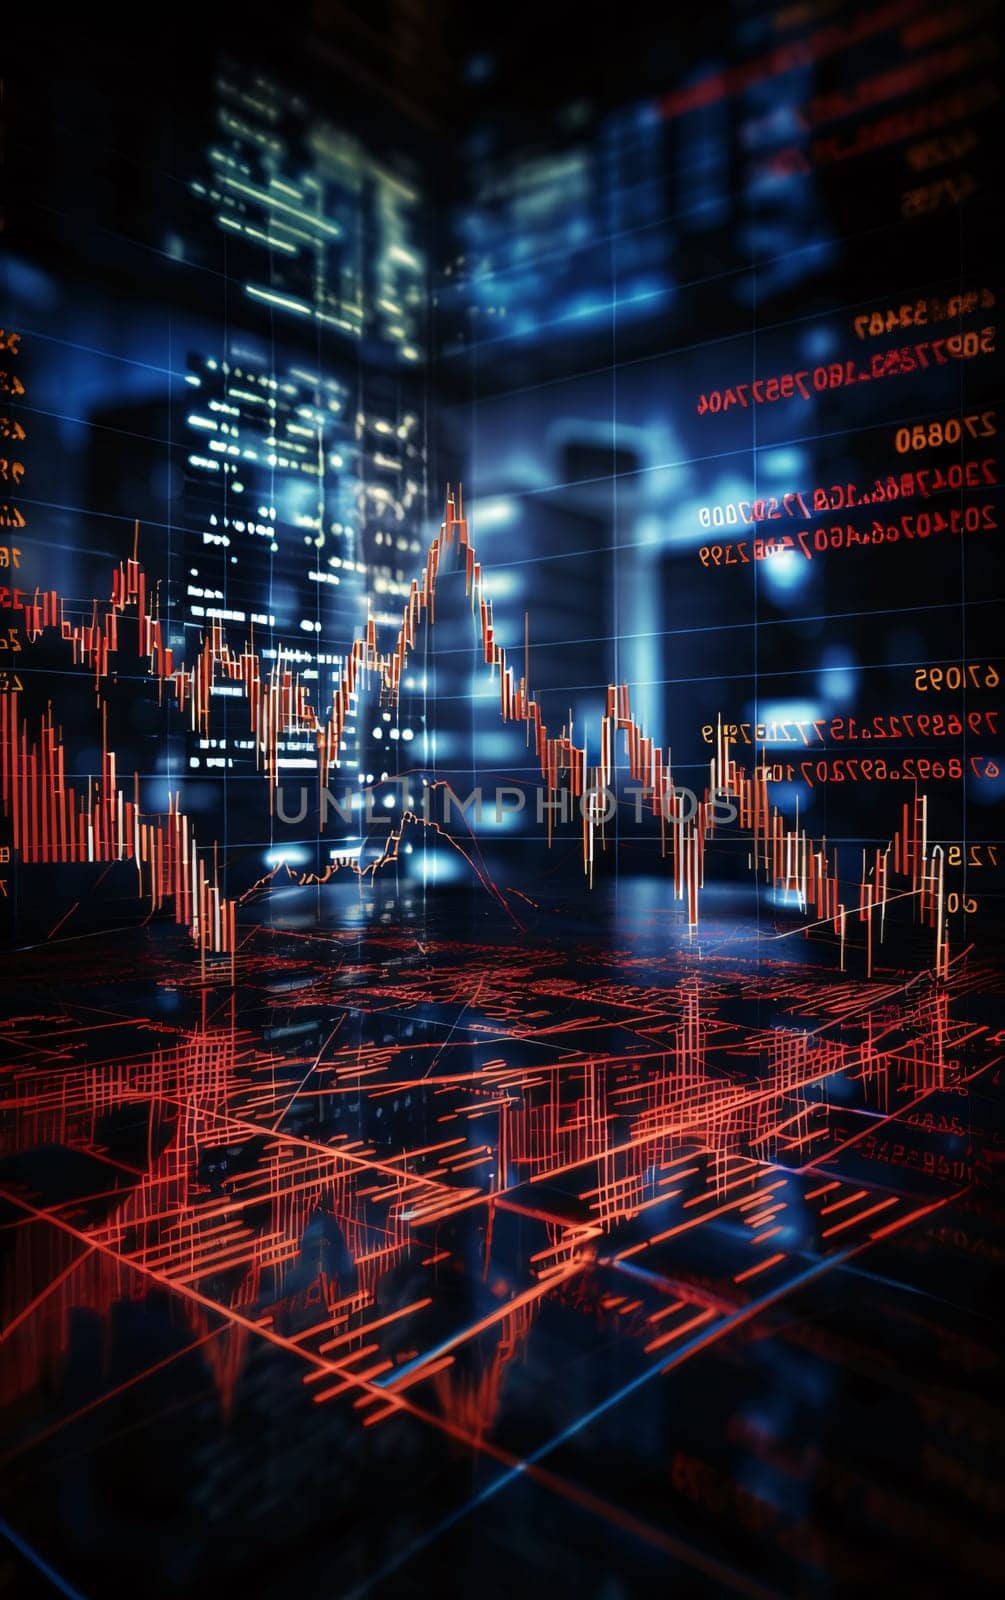 Stock Market: financial stock market graph on technology abstract background. Economy concept. 3d rendering